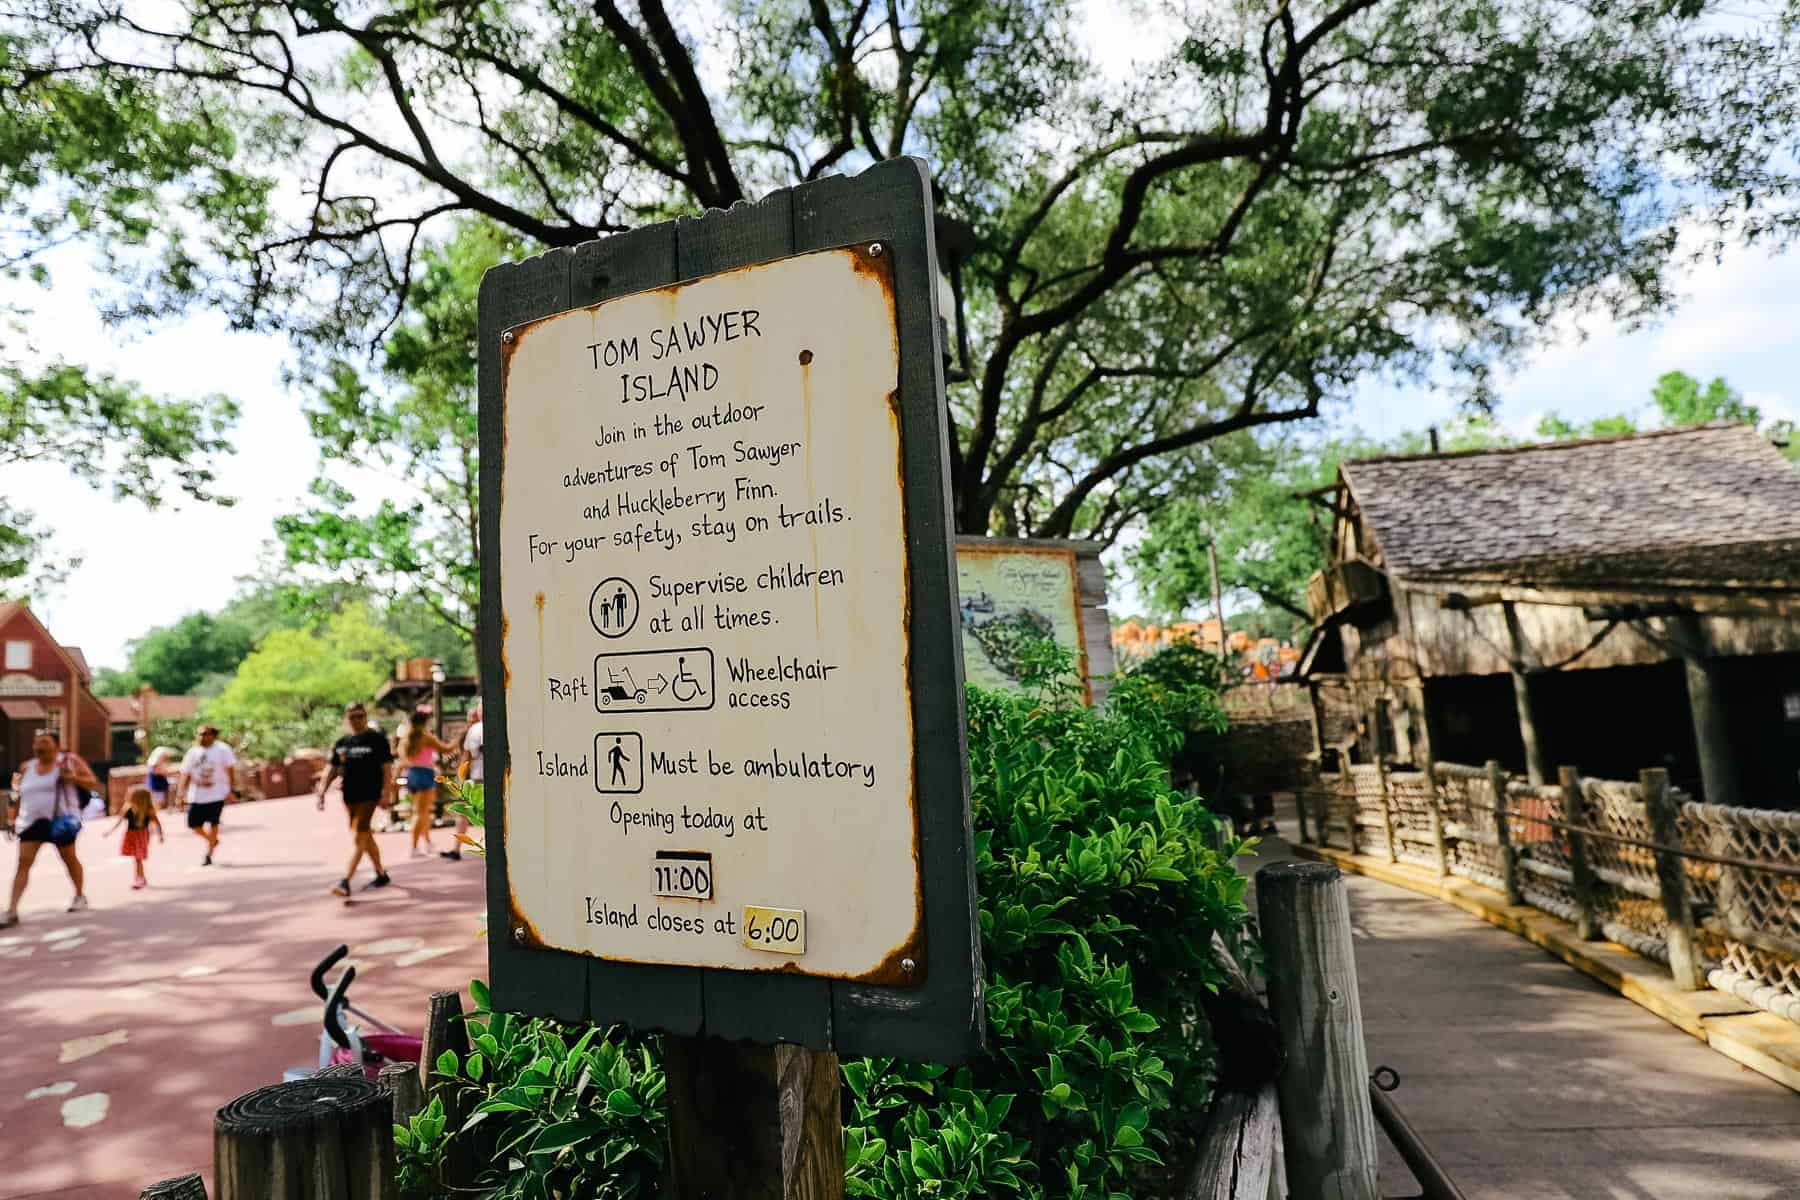 posted ride rules and hours of operation for Tom Sawyer Island 